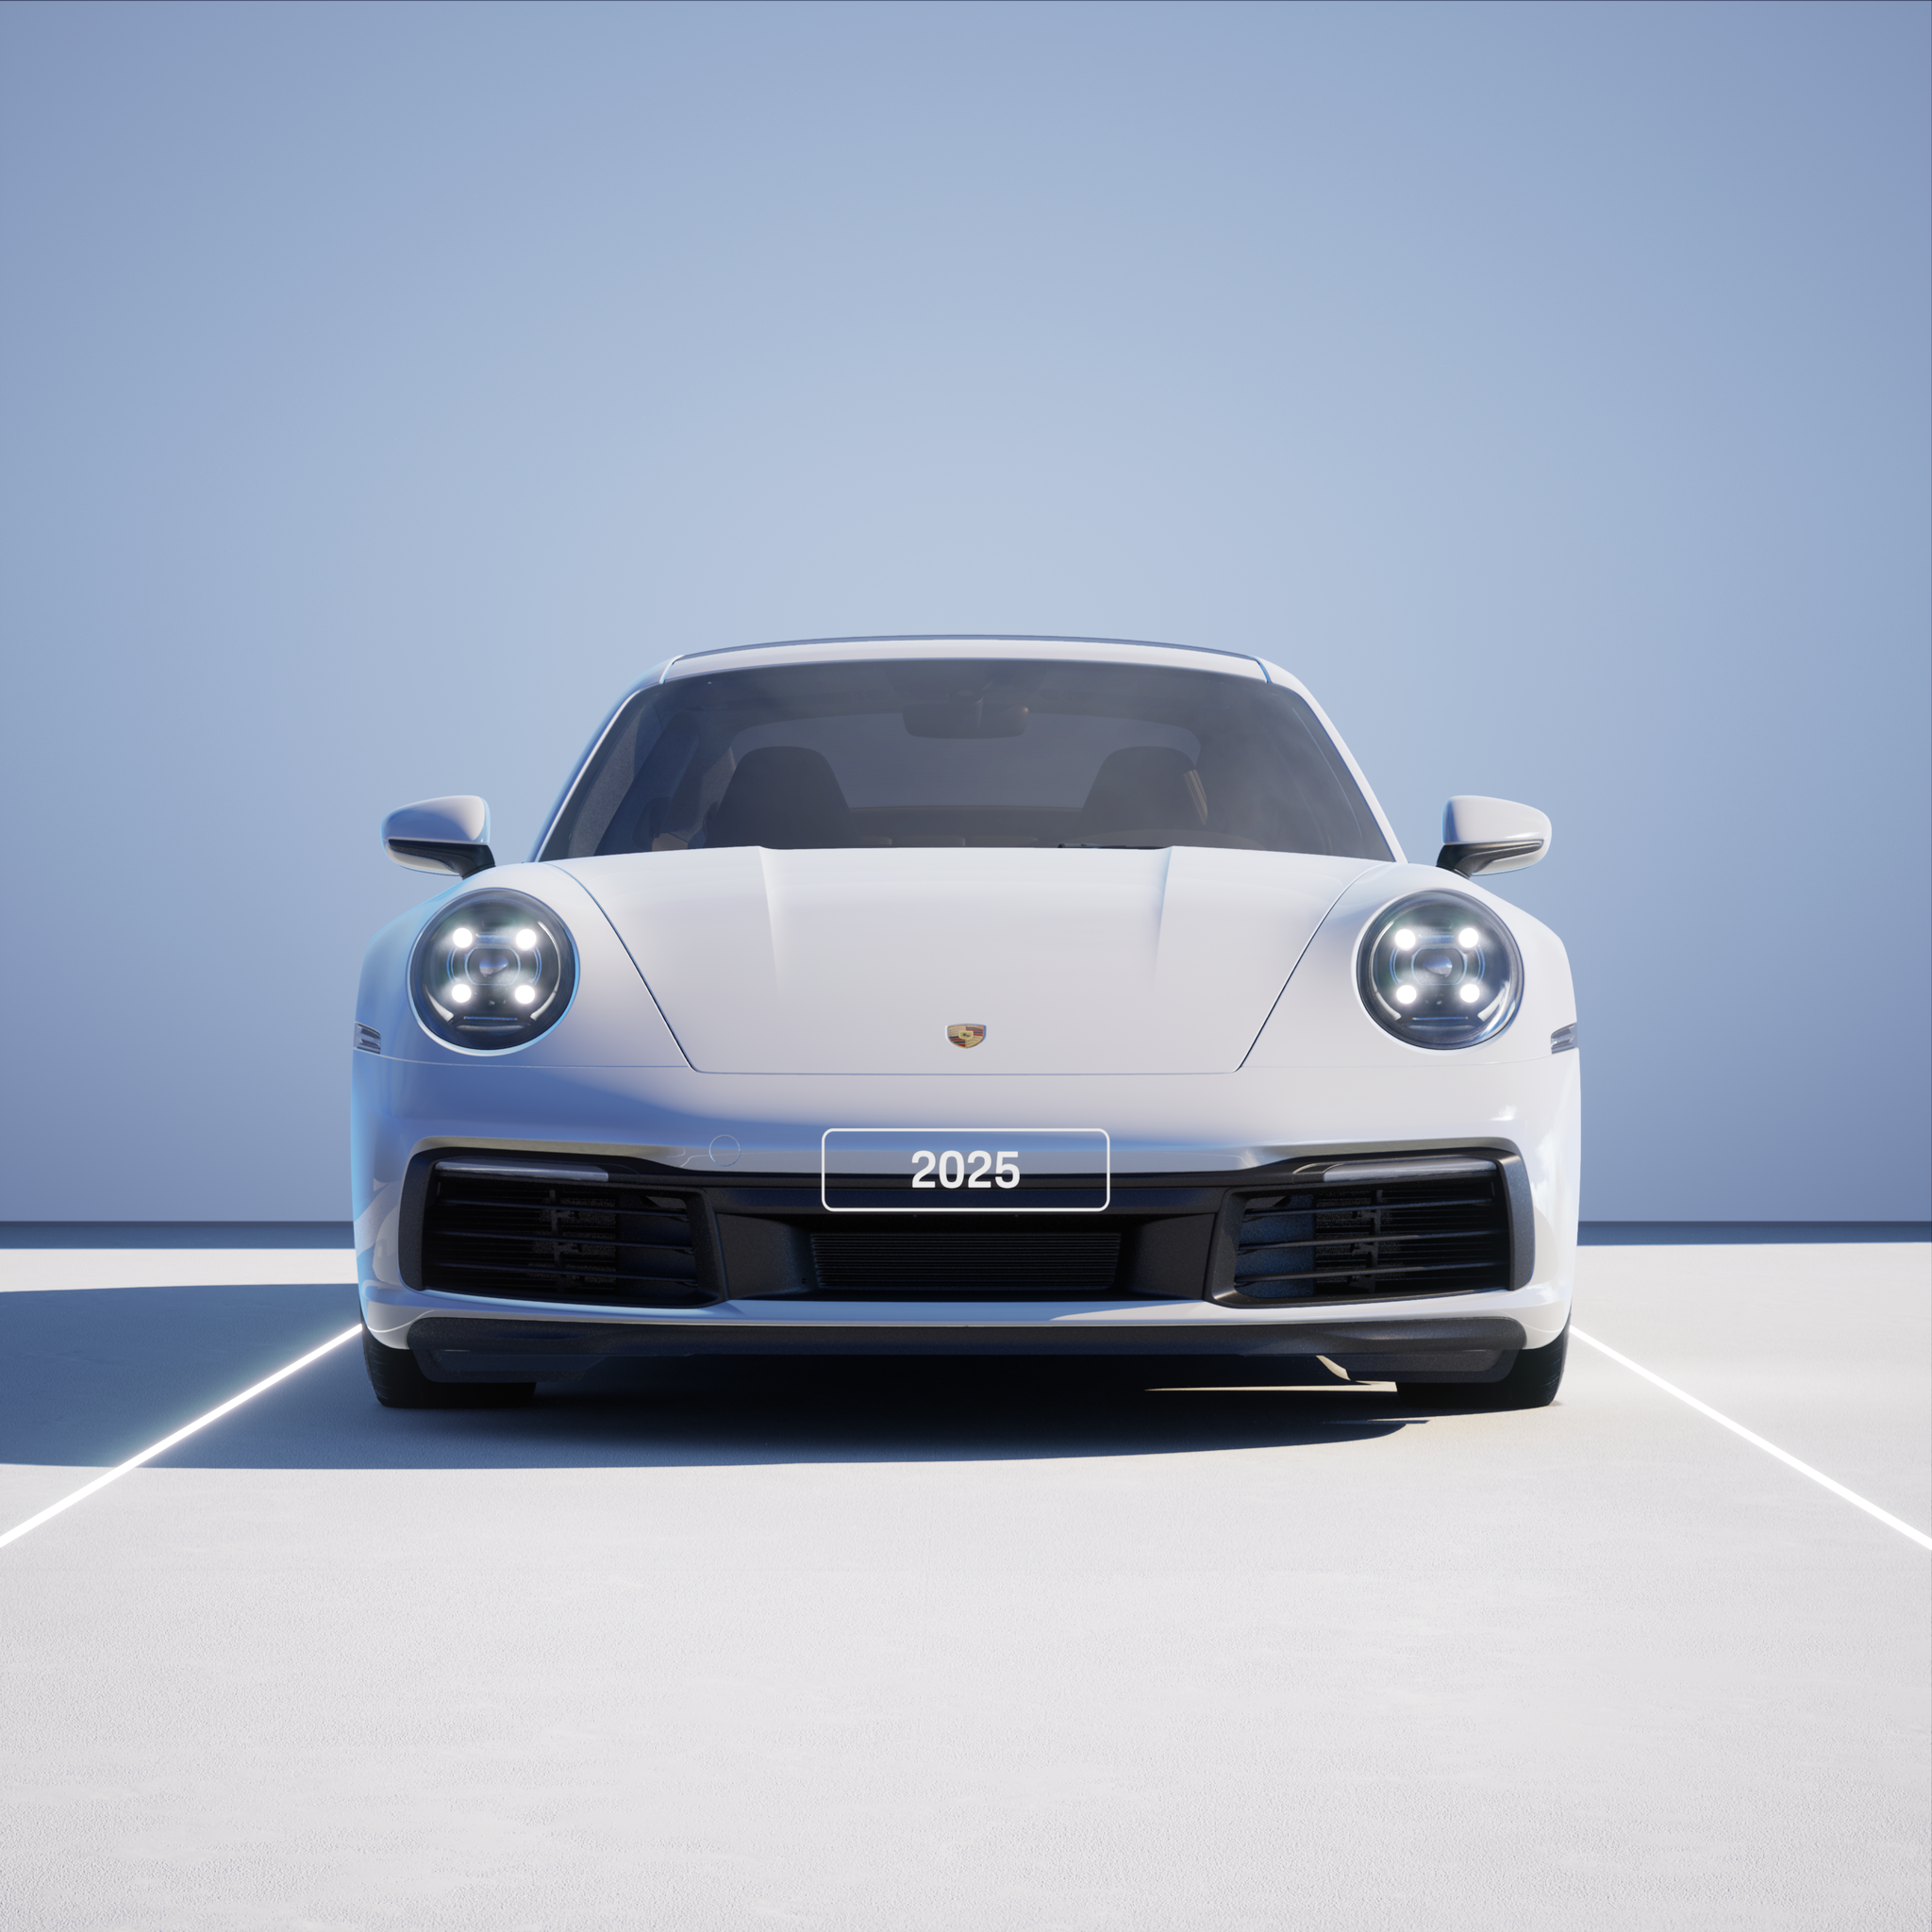 The PORSCHΞ 911 2025 image in phase